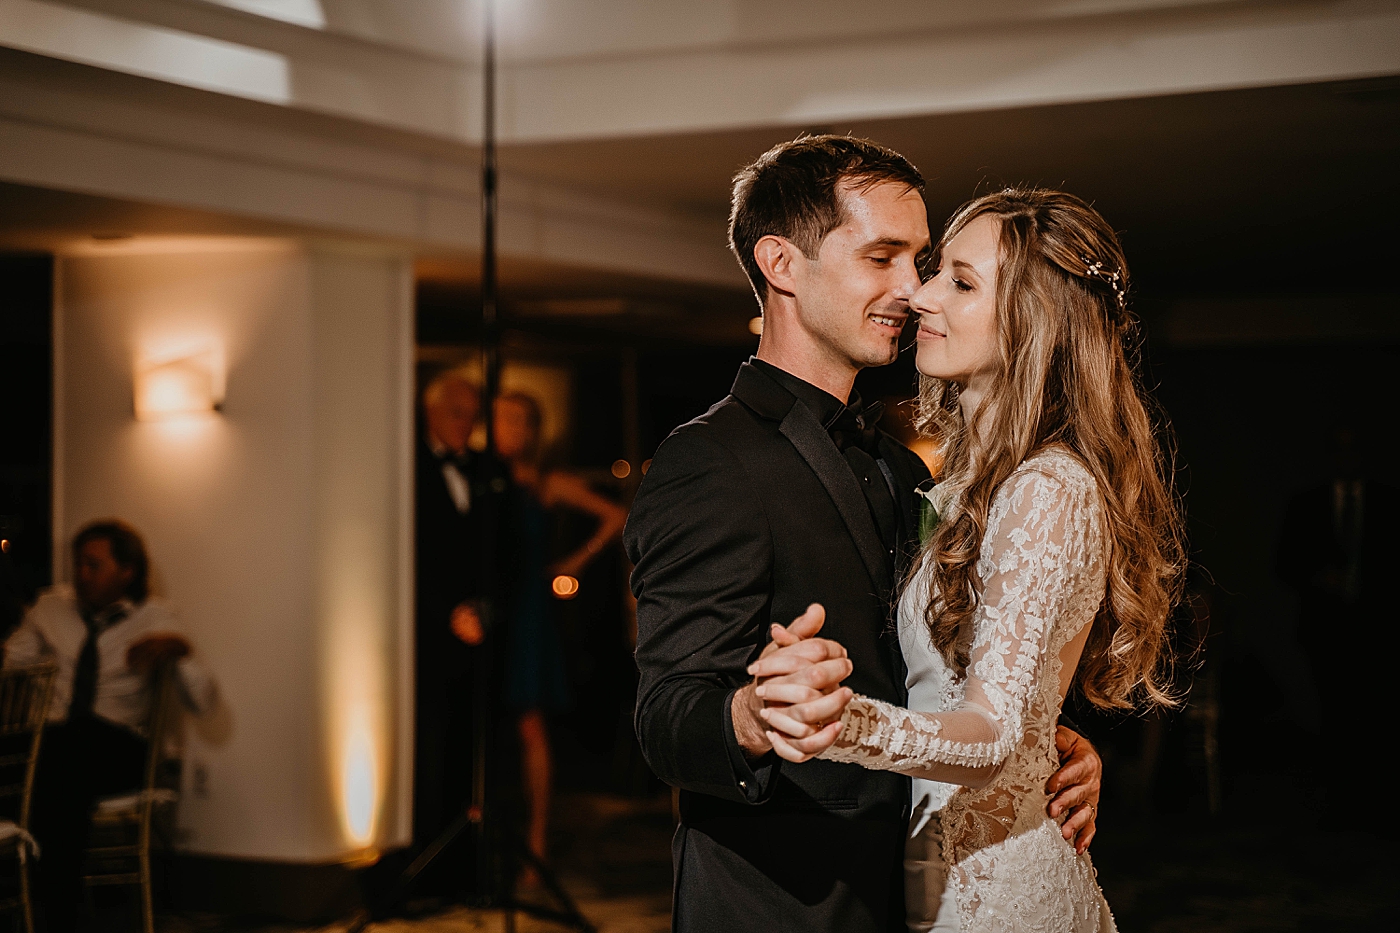 First Dance closeup Waterstone Resort and Marina Wedding captured by South Florida Wedding Photographer Krystal Capone Photography